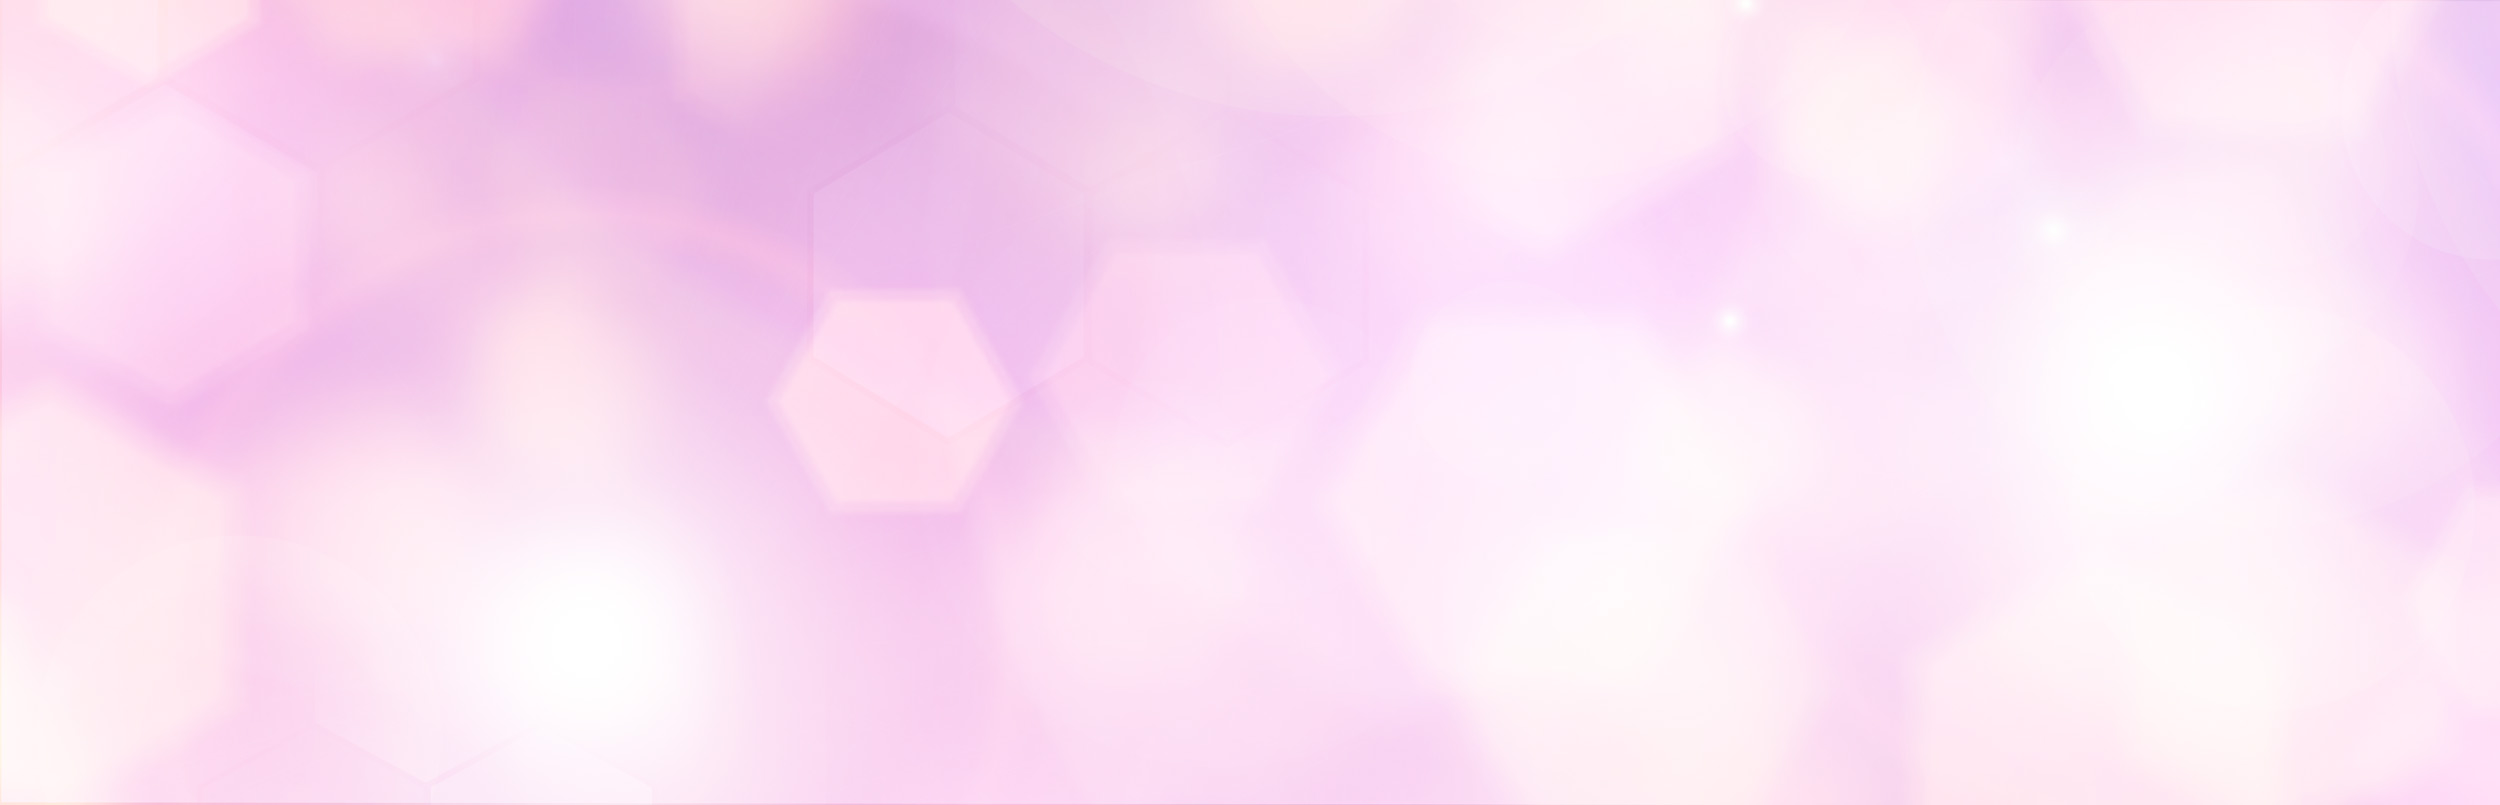 lilac background with flare effect